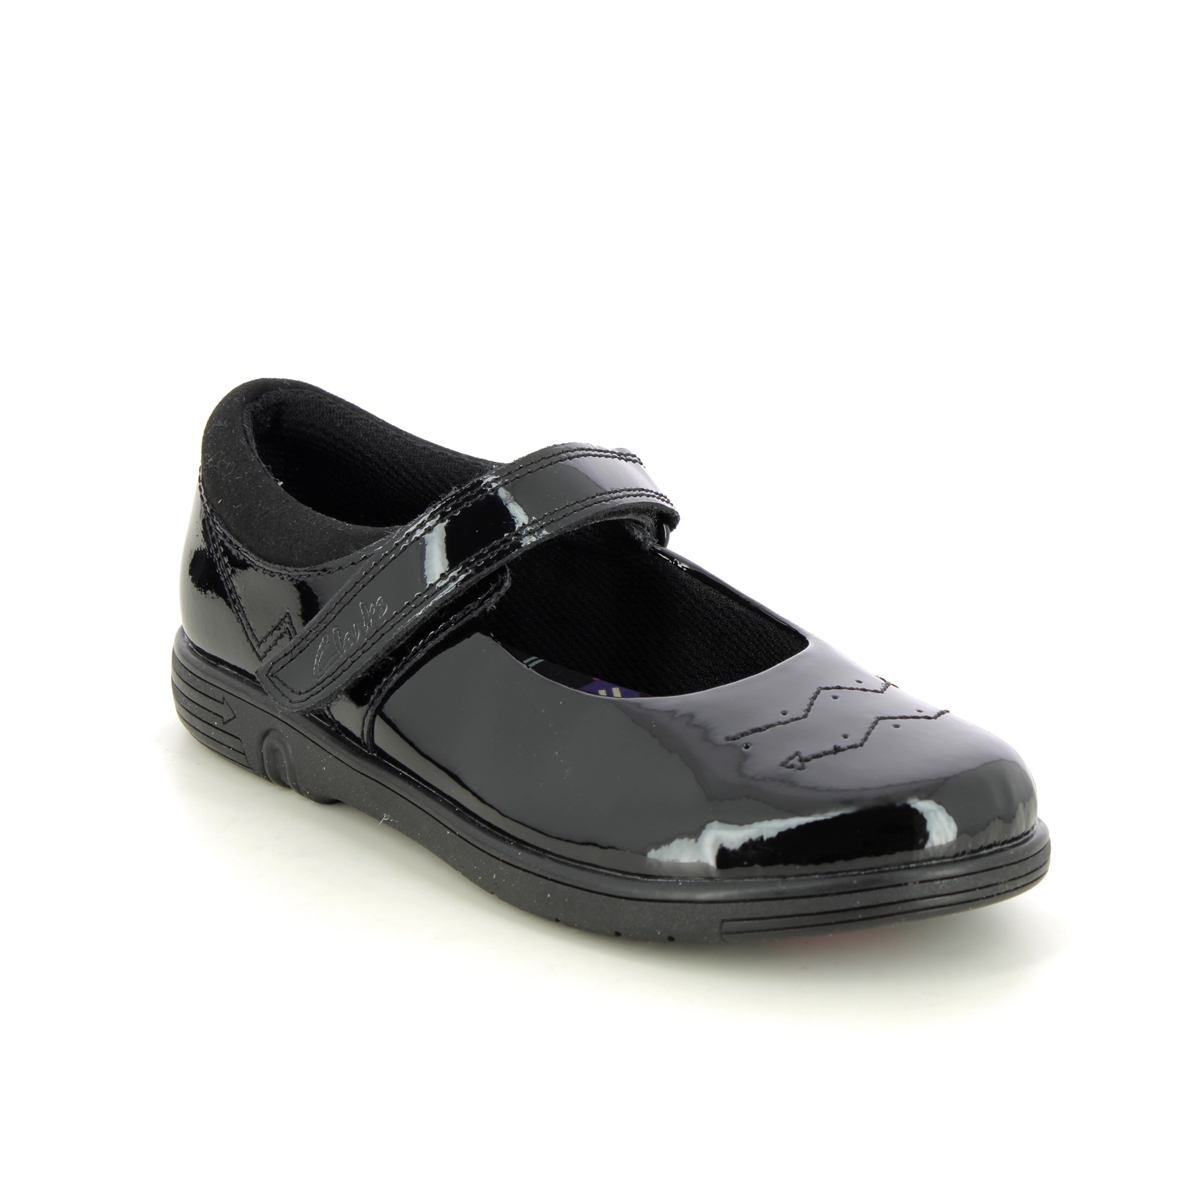 Clarks Jazzy Jig K Mary Jane Black Patent Kids Girls School Shoes 753087G In Size 11 In Plain Black Patent G Width Fitting For School For kids